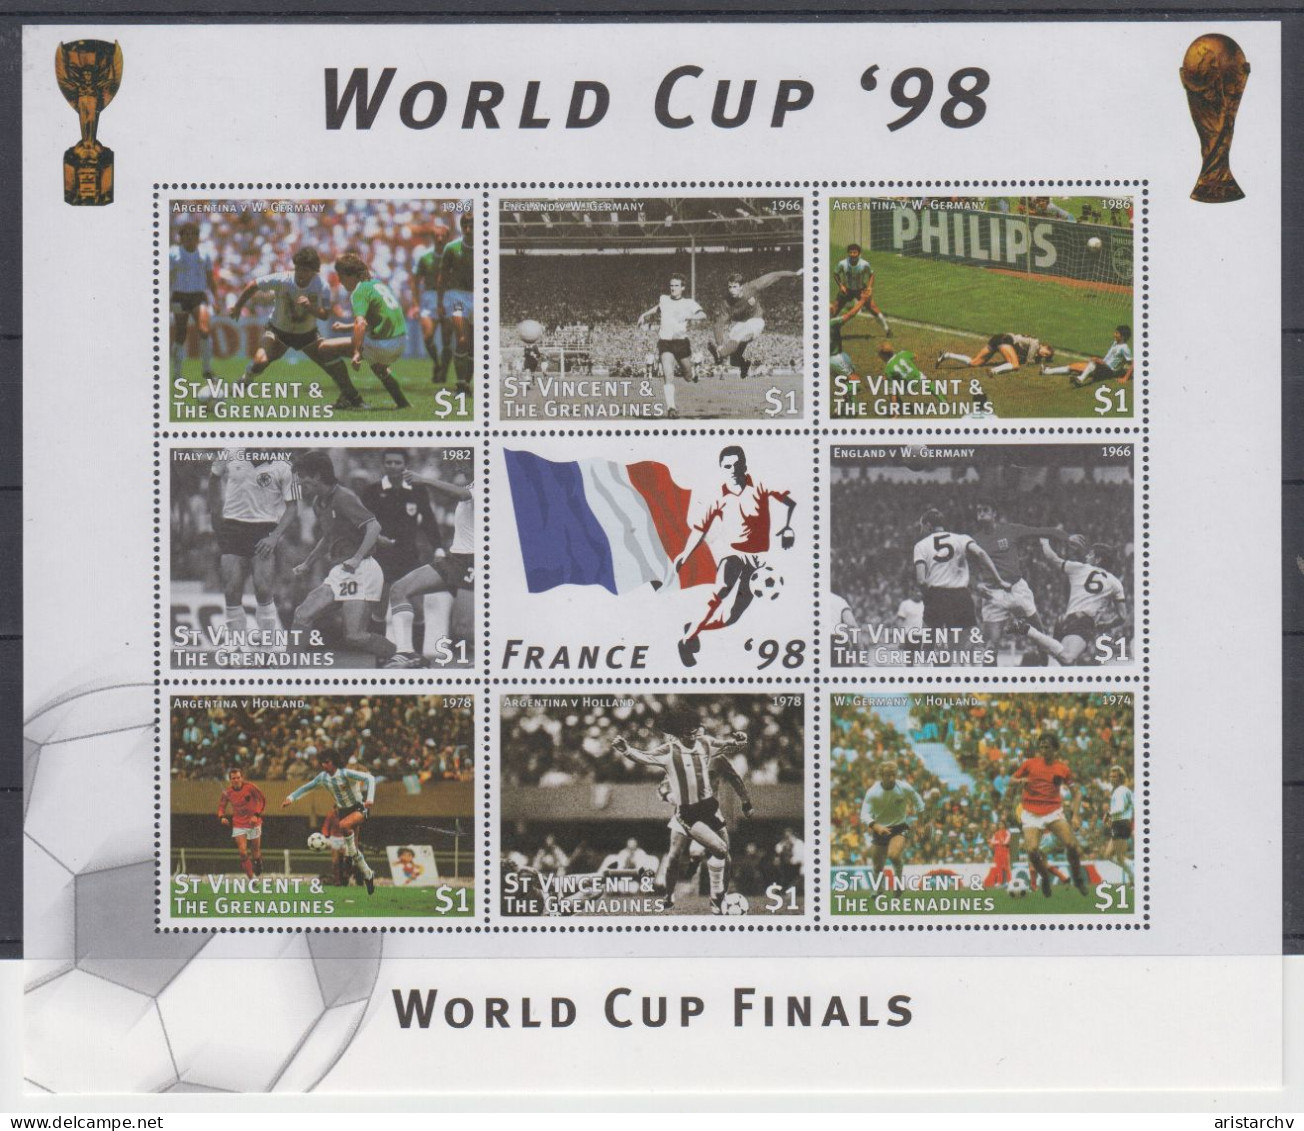 ST. VINCENT GRENADINES 1998 FOOTBALL WORLD CUP 4 S/SHEETS 4 SHEETLETS AND 6 STAMPS - 1998 – Frankreich